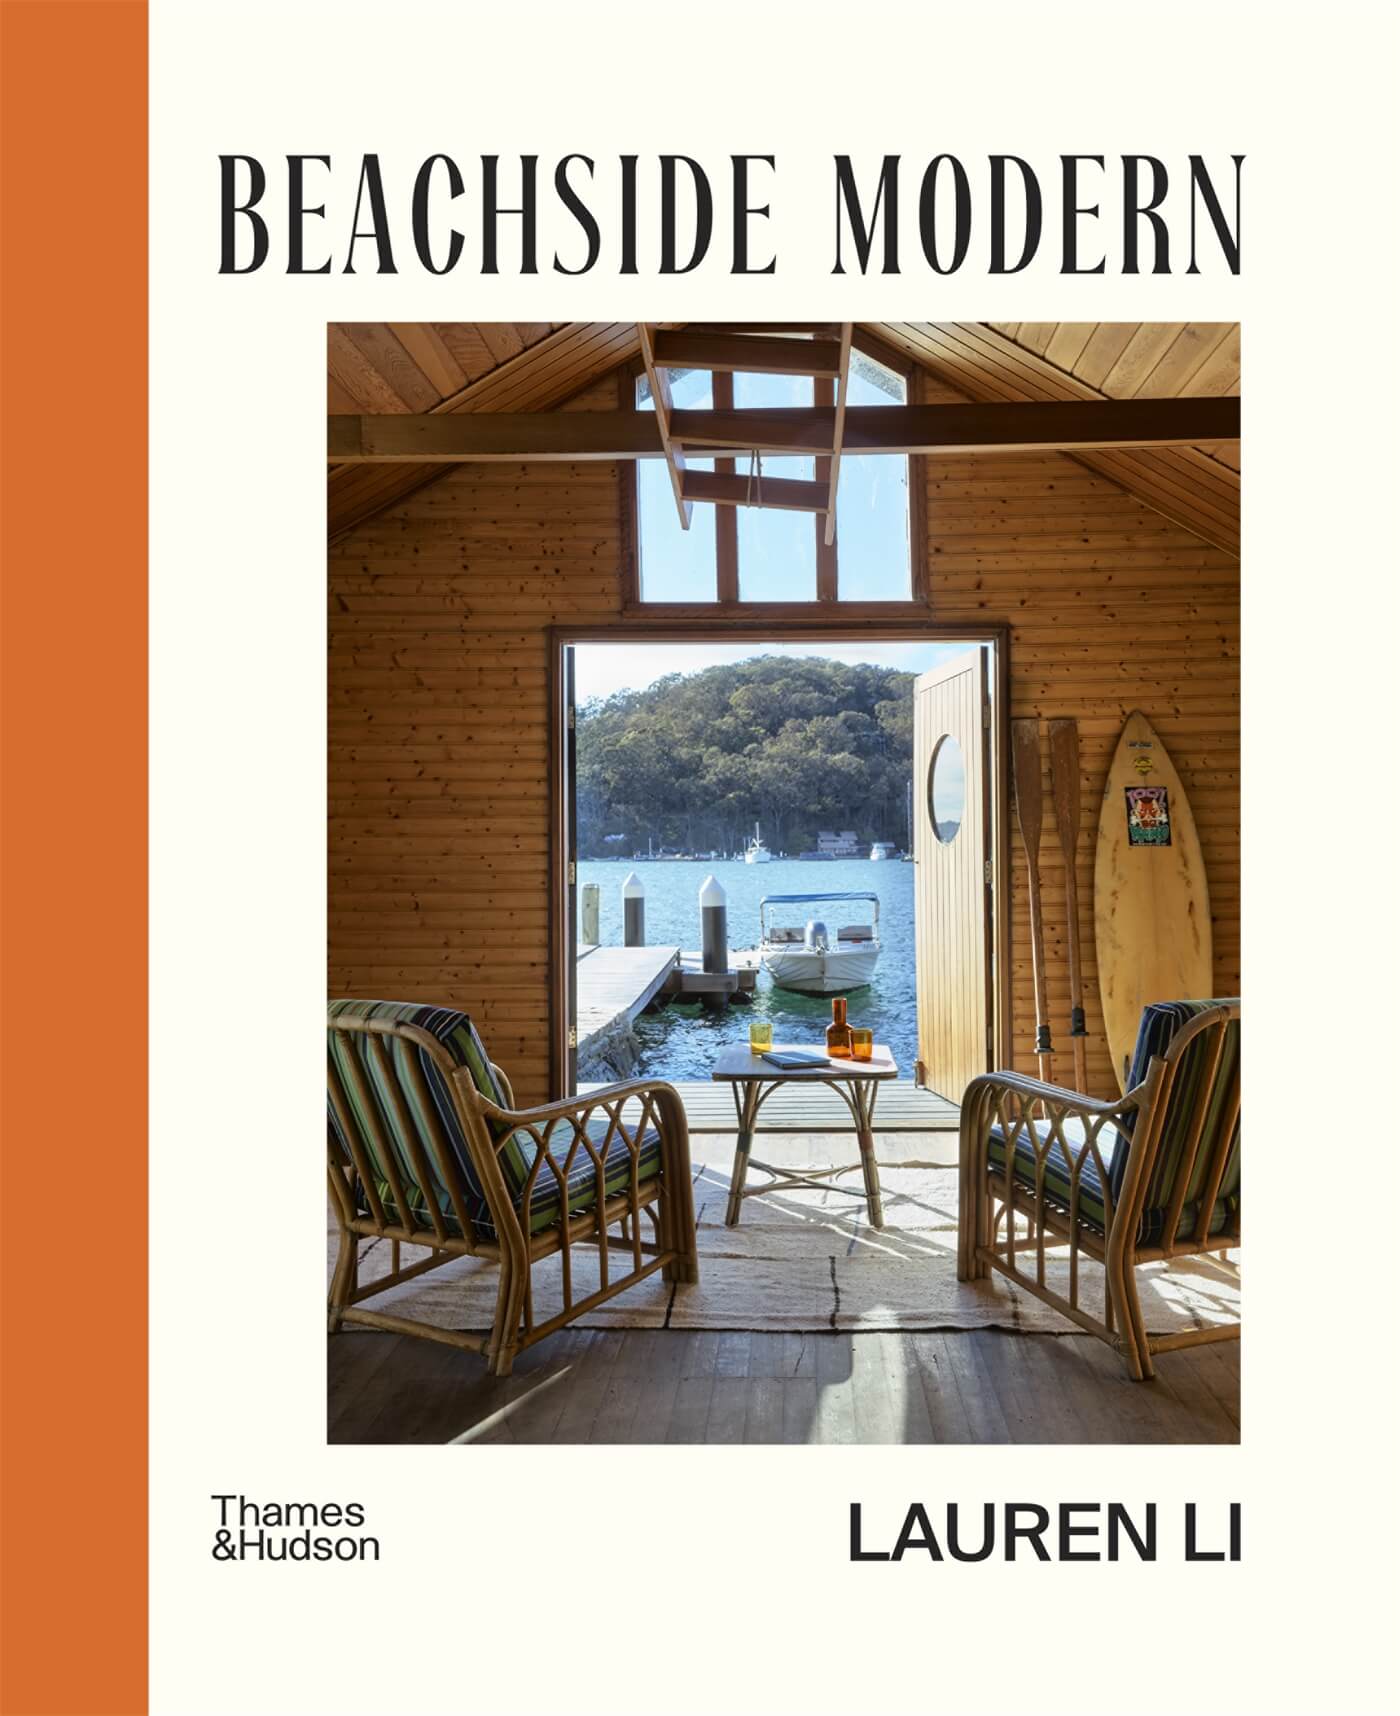 Photograph of book cover of Beachside Modern